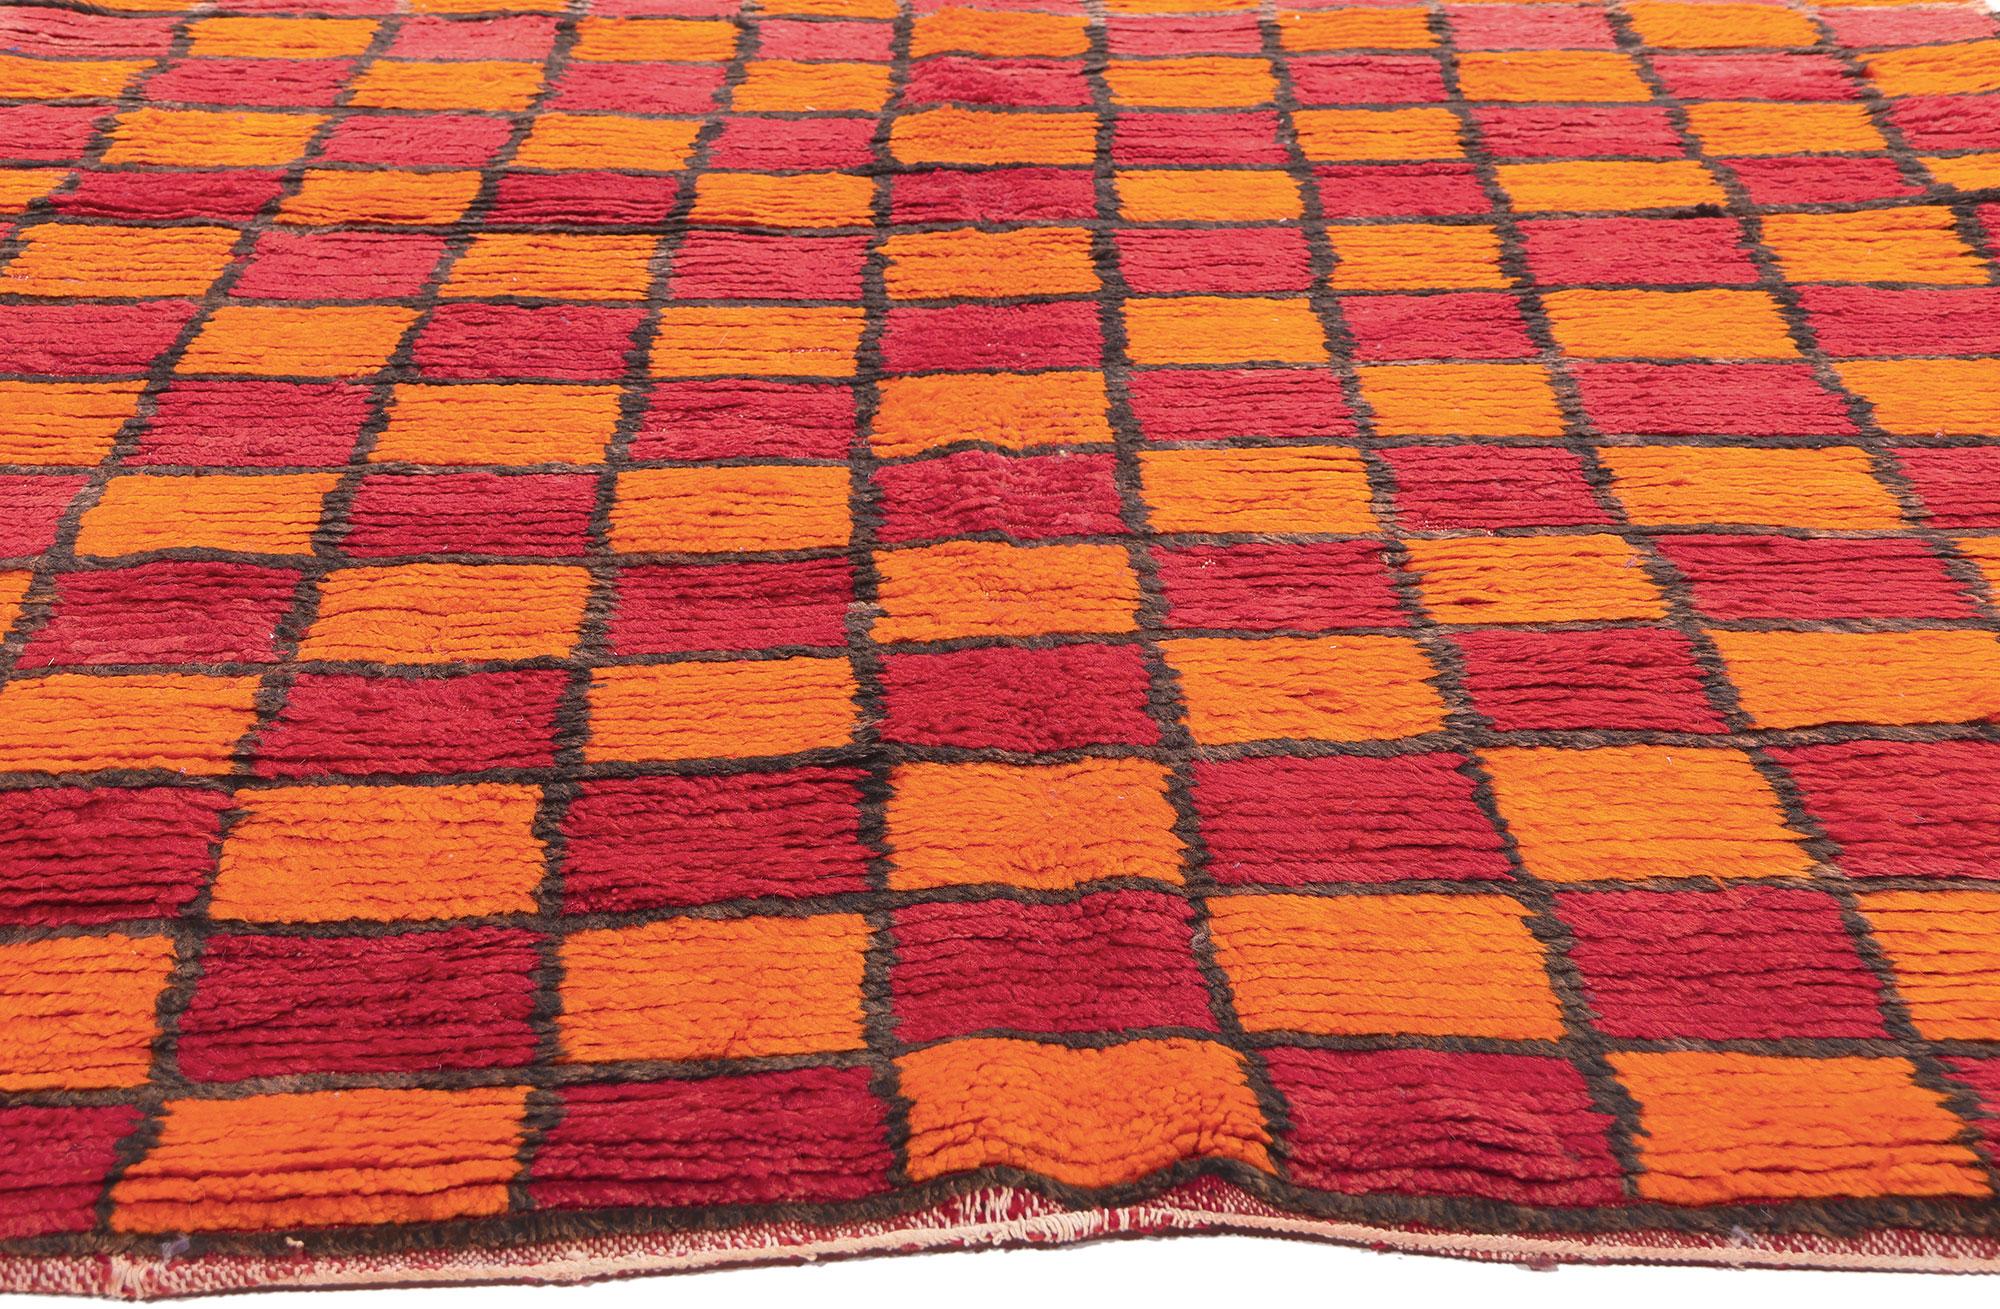 Reversible Vintage Moroccan Rug, Bauhaus Cubism Meets Tribal Enchantment In Good Condition For Sale In Dallas, TX